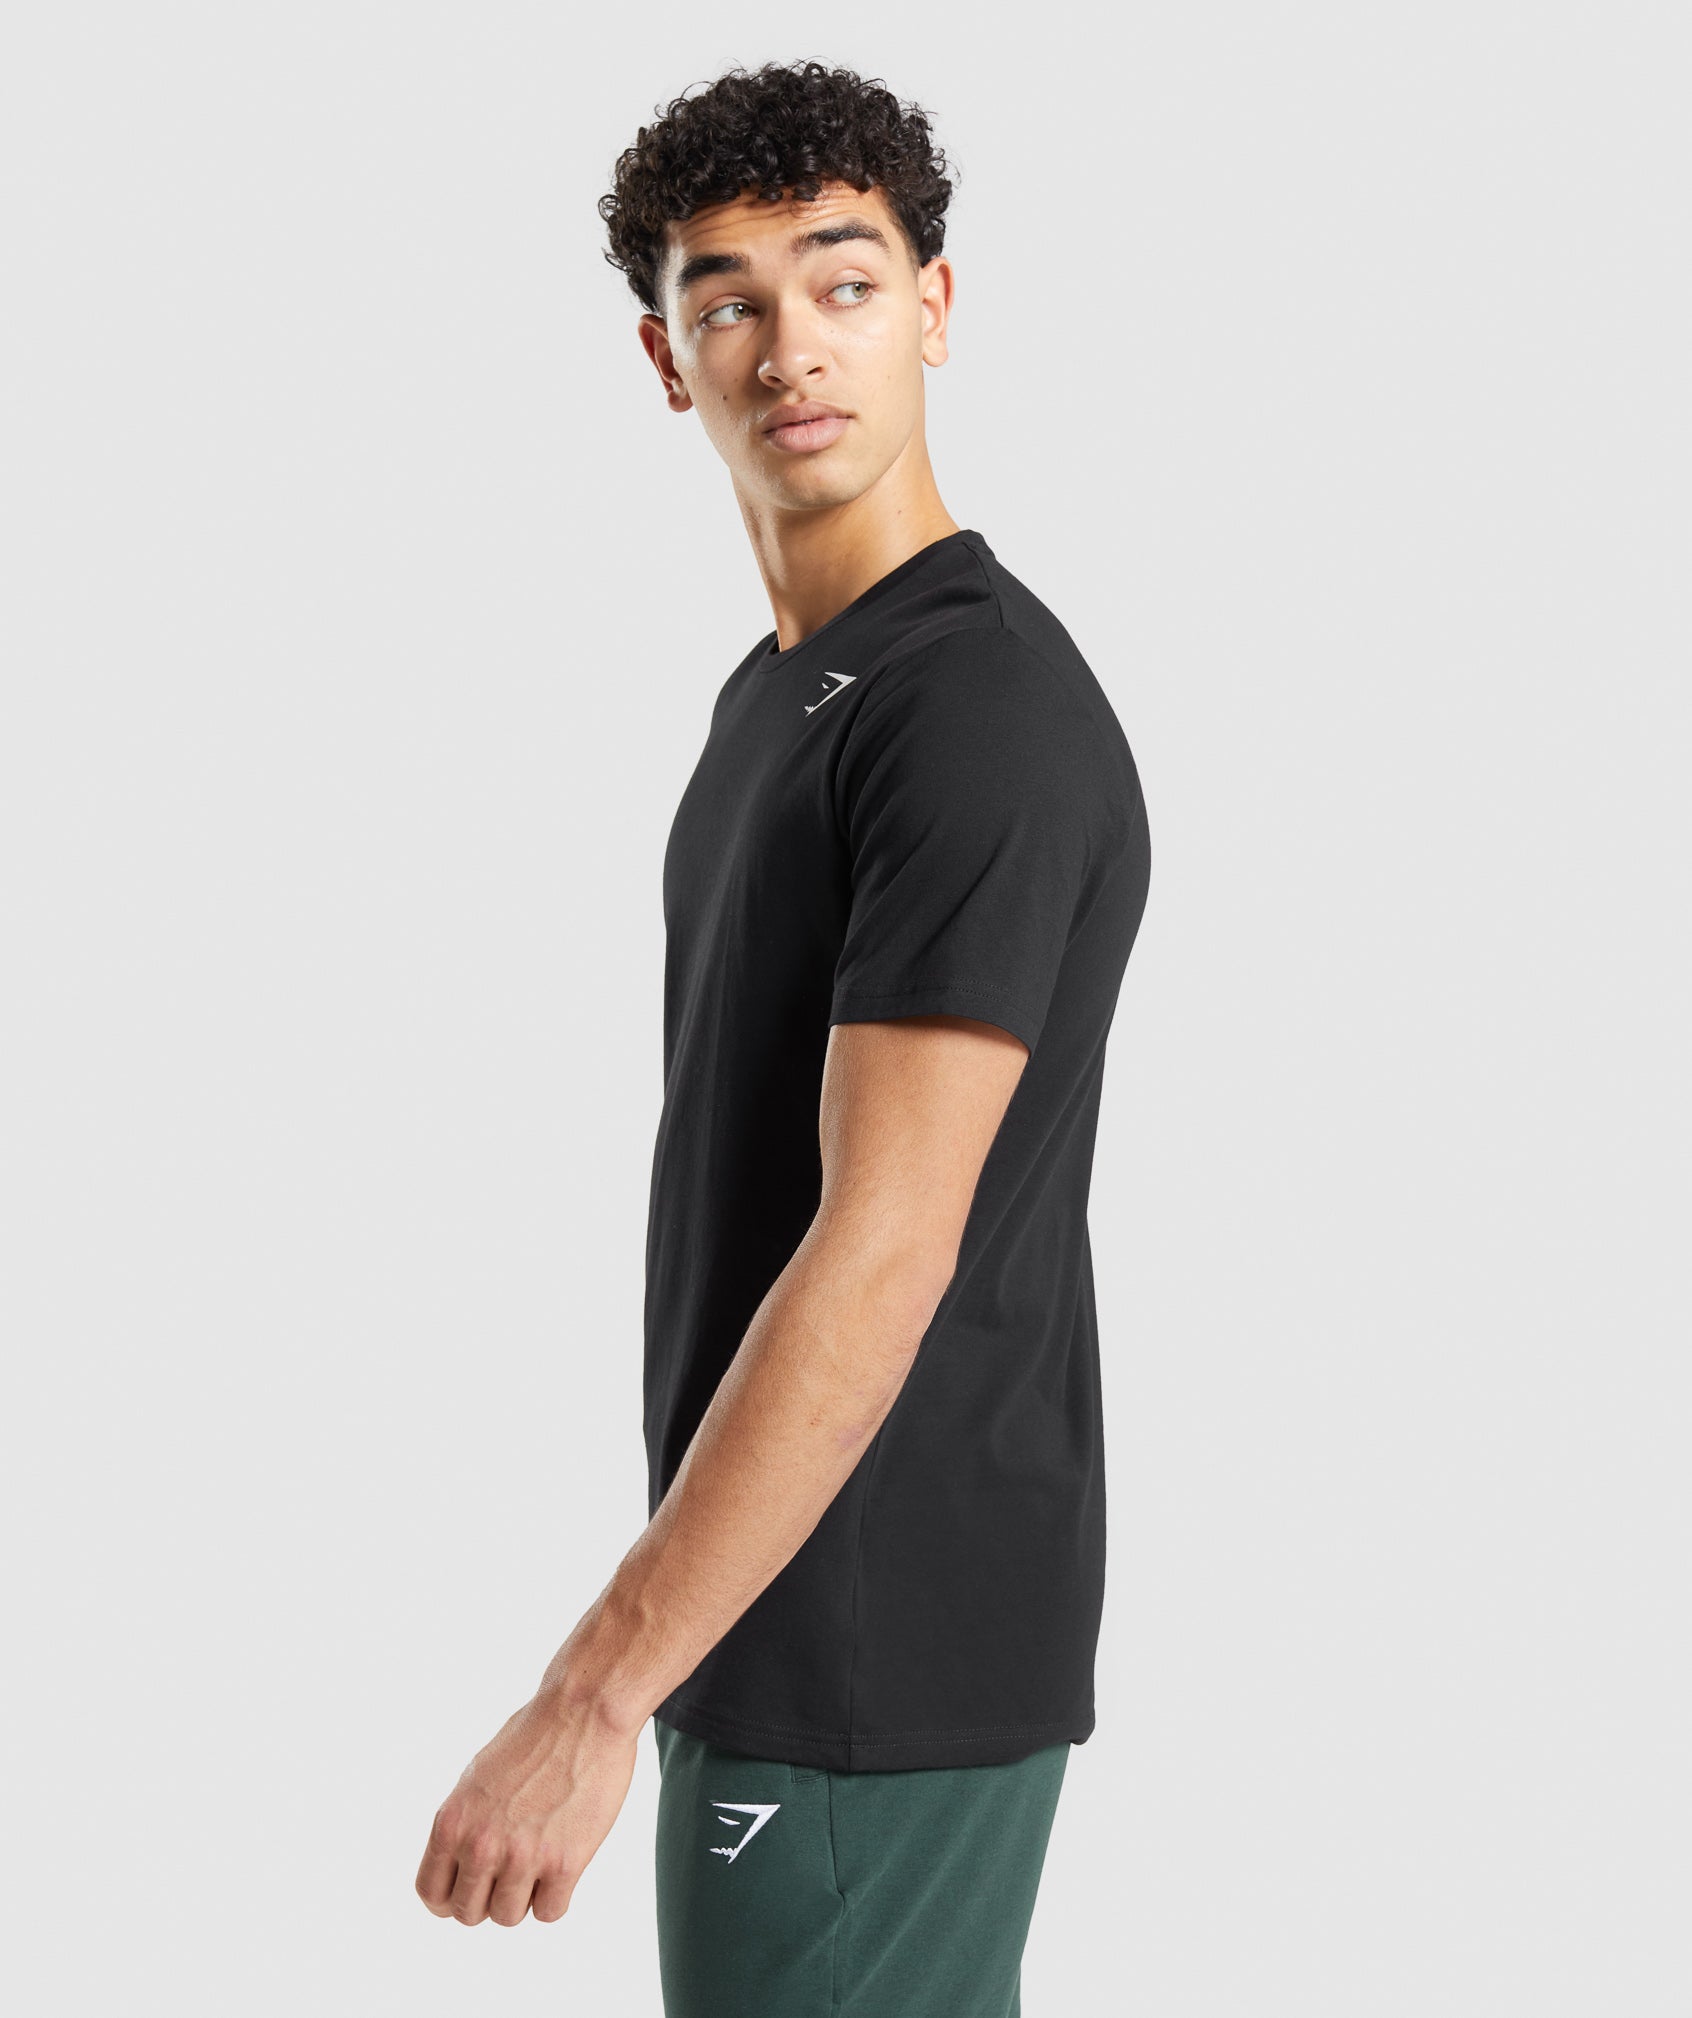 Essential T-Shirt in Black - view 3